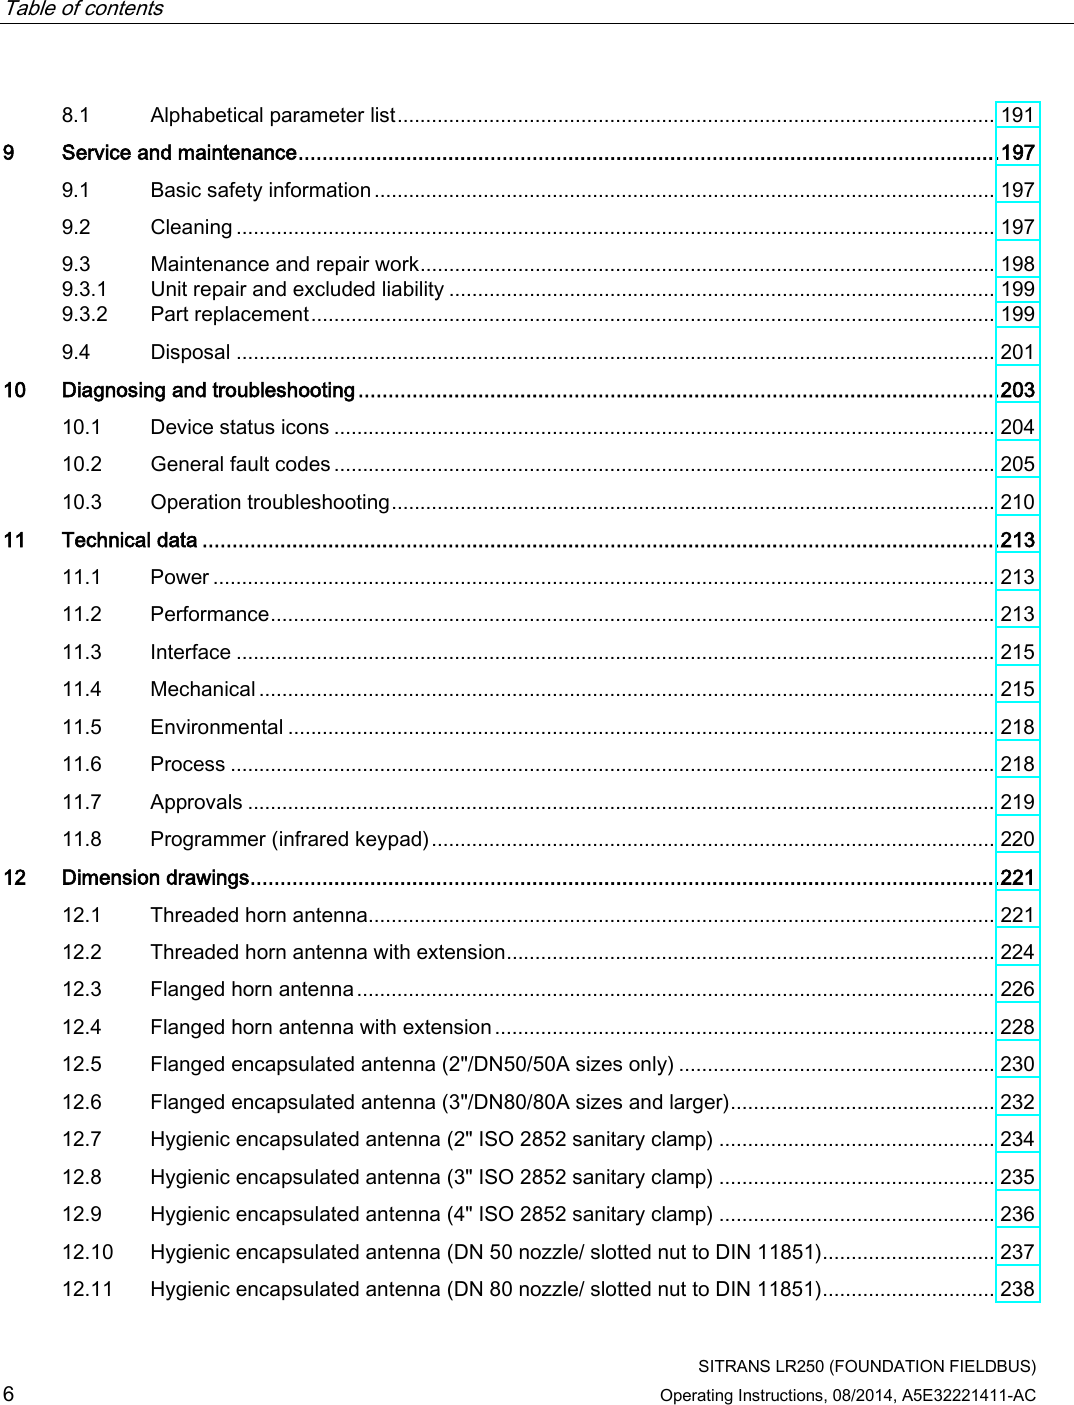 Table of contents      SITRANS LR250 (FOUNDATION FIELDBUS) 6 Operating Instructions, 08/2014, A5E32221411-AC 8.1 Alphabetical parameter list ........................................................................................................ 191 9  Service and maintenance ..................................................................................................................... 197 9.1 Basic safety information ............................................................................................................ 197 9.2 Cleaning .................................................................................................................................... 197 9.3 Maintenance and repair work .................................................................................................... 198 9.3.1 Unit repair and excluded liability ............................................................................................... 199 9.3.2 Part replacement ....................................................................................................................... 199 9.4 Disposal .................................................................................................................................... 201 10 Diagnosing and troubleshooting ........................................................................................................... 203 10.1 Device status icons ................................................................................................................... 204 10.2 General fault codes ................................................................................................................... 205 10.3 Operation troubleshooting ......................................................................................................... 210 11 Technical data ..................................................................................................................................... 213 11.1 Power ........................................................................................................................................ 213 11.2 Performance .............................................................................................................................. 213 11.3 Interface .................................................................................................................................... 215 11.4 Mechanical ................................................................................................................................ 215 11.5 Environmental ........................................................................................................................... 218 11.6 Process ..................................................................................................................................... 218 11.7 Approvals .................................................................................................................................. 219 11.8 Programmer (infrared keypad) .................................................................................................. 220 12 Dimension drawings ............................................................................................................................. 221 12.1 Threaded horn antenna............................................................................................................. 221 12.2 Threaded horn antenna with extension ..................................................................................... 224 12.3 Flanged horn antenna ............................................................................................................... 226 12.4 Flanged horn antenna with extension ....................................................................................... 228 12.5 Flanged encapsulated antenna (2&quot;/DN50/50A sizes only) ....................................................... 230 12.6 Flanged encapsulated antenna (3&quot;/DN80/80A sizes and larger) .............................................. 232 12.7 Hygienic encapsulated antenna (2&quot; ISO 2852 sanitary clamp) ................................................ 234 12.8 Hygienic encapsulated antenna (3&quot; ISO 2852 sanitary clamp) ................................................ 235 12.9 Hygienic encapsulated antenna (4&quot; ISO 2852 sanitary clamp) ................................................ 236 12.10 Hygienic encapsulated antenna (DN 50 nozzle/ slotted nut to DIN 11851) .............................. 237 12.11 Hygienic encapsulated antenna (DN 80 nozzle/ slotted nut to DIN 11851) .............................. 238 